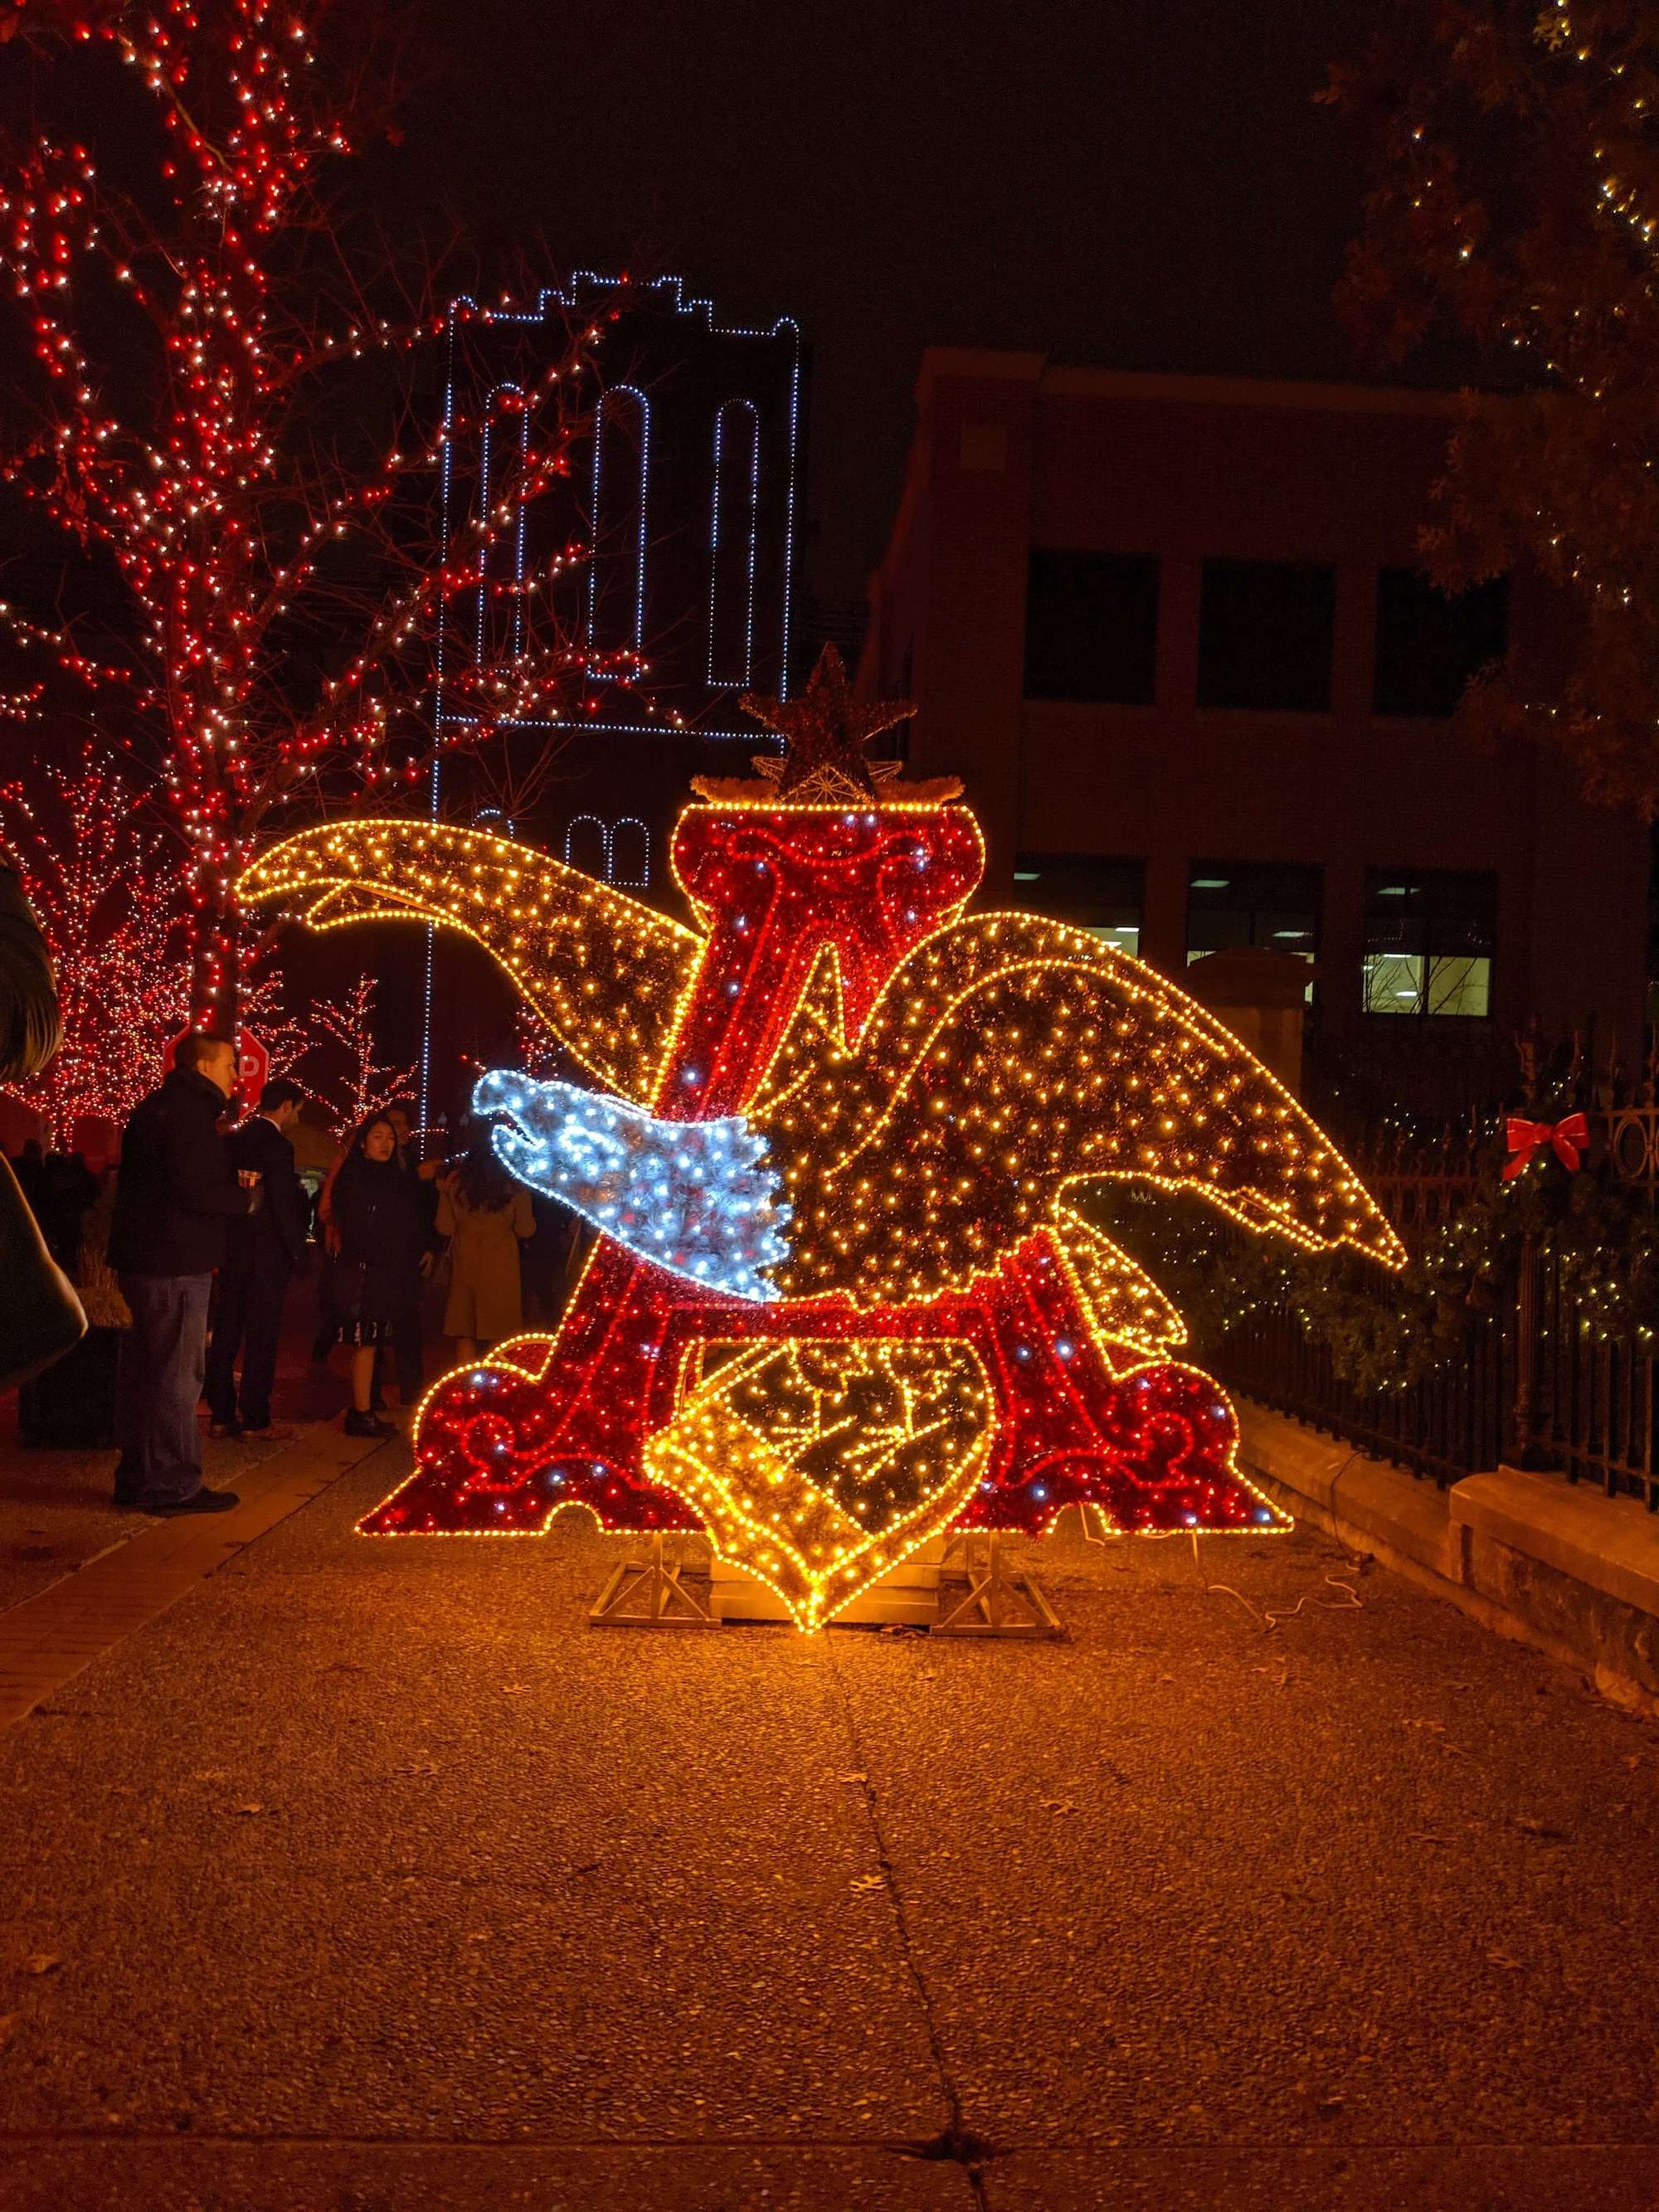 The Anheuser-Busch logo (an Eagle flying across an A) made up completely of Christmas lights.